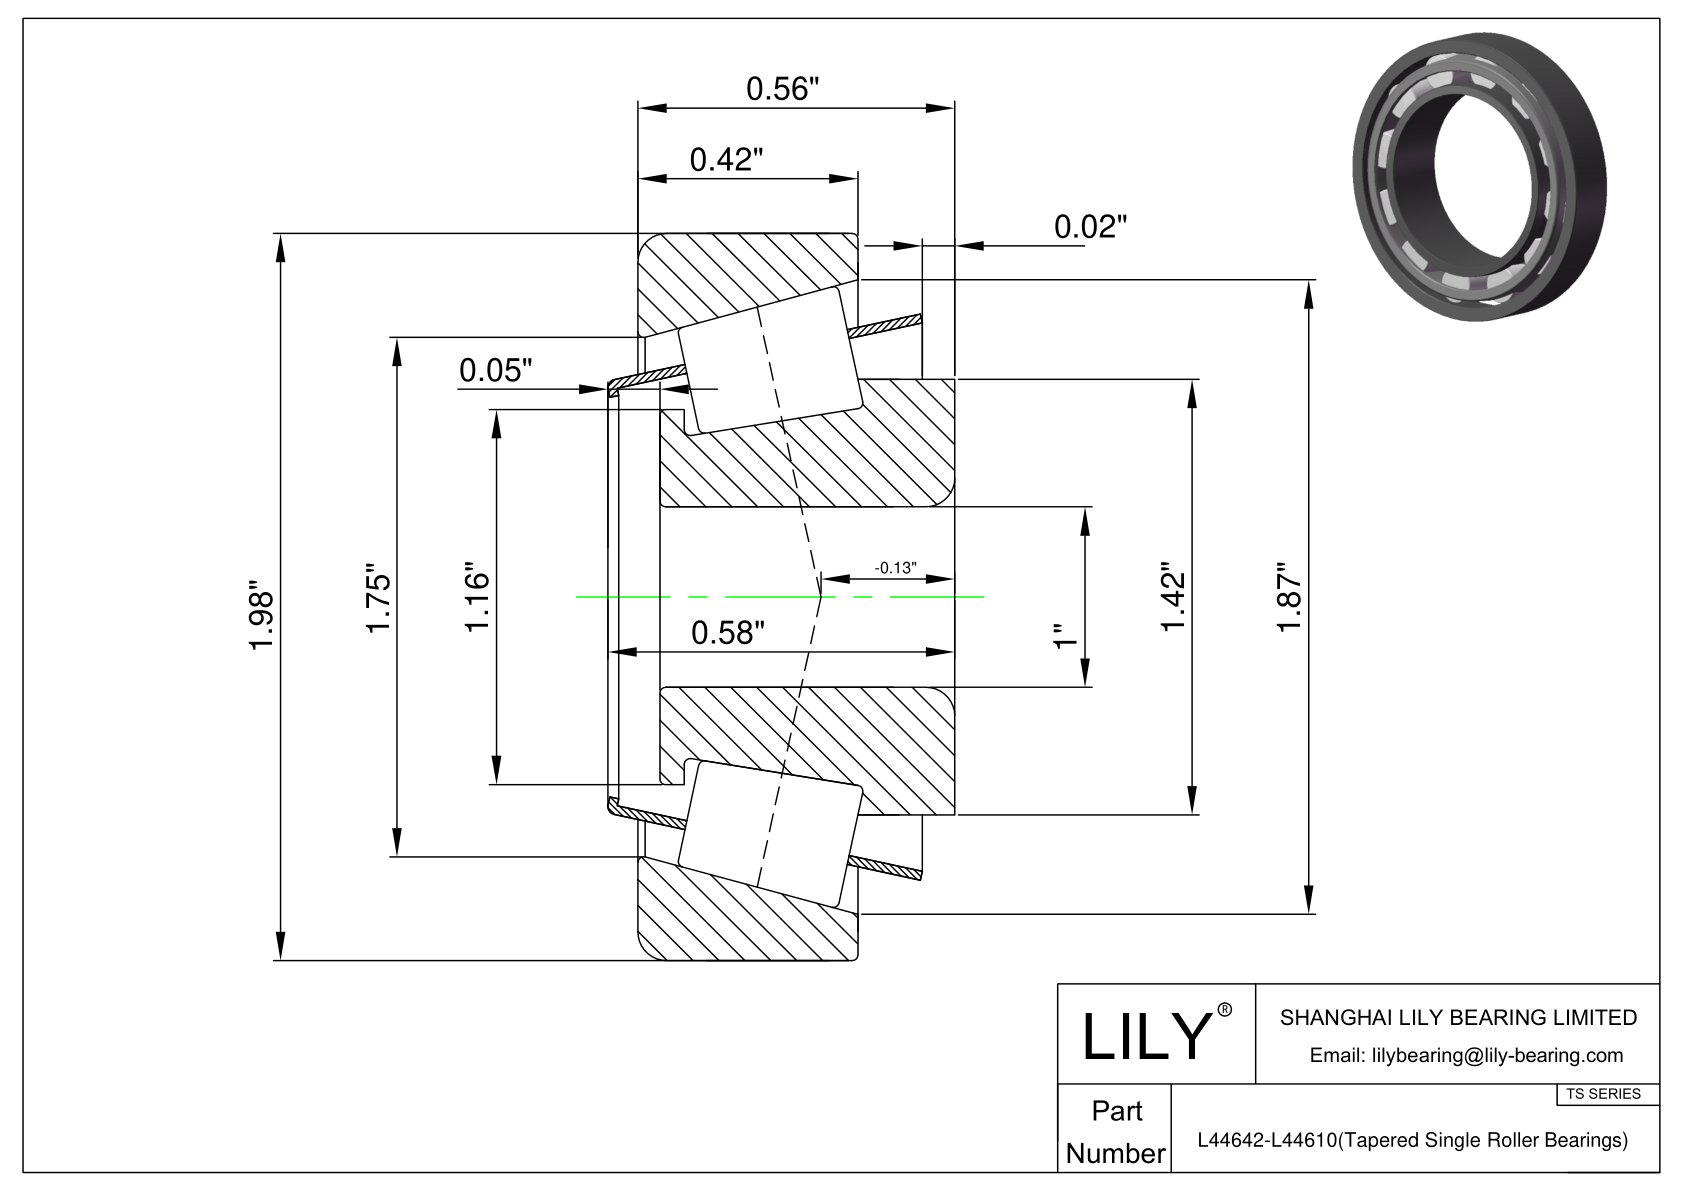 L44642-L44610 TS (Tapered Single Roller Bearings) (Imperial) cad drawing